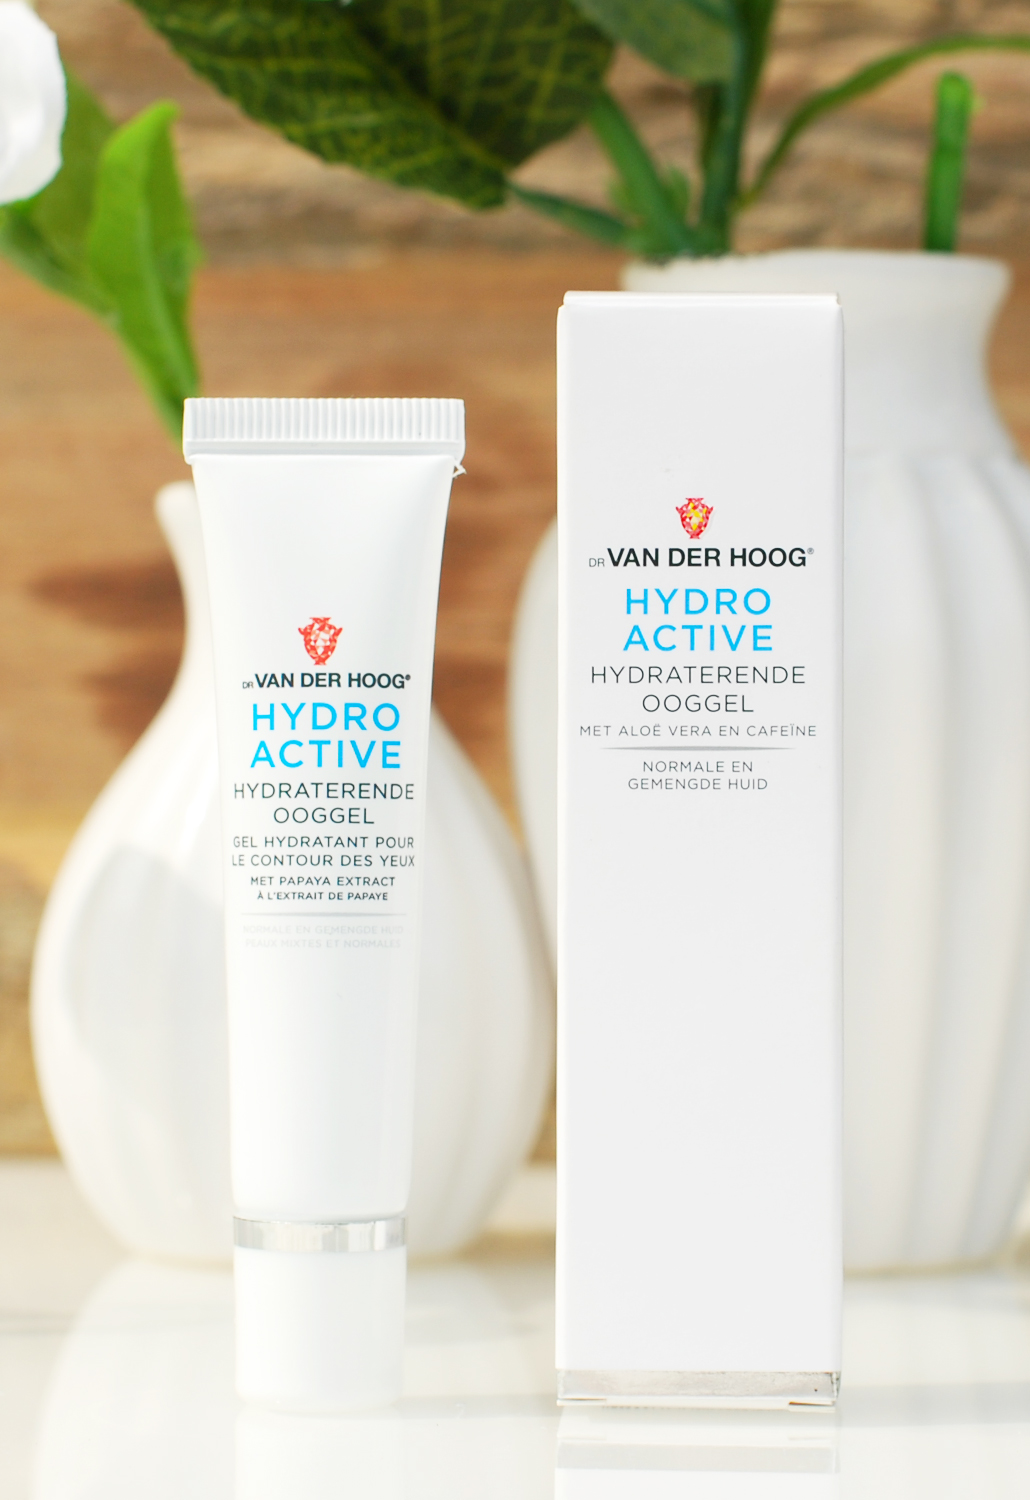 Dr van der hood hydro active hydraterende ooggel review lifestyle by linda